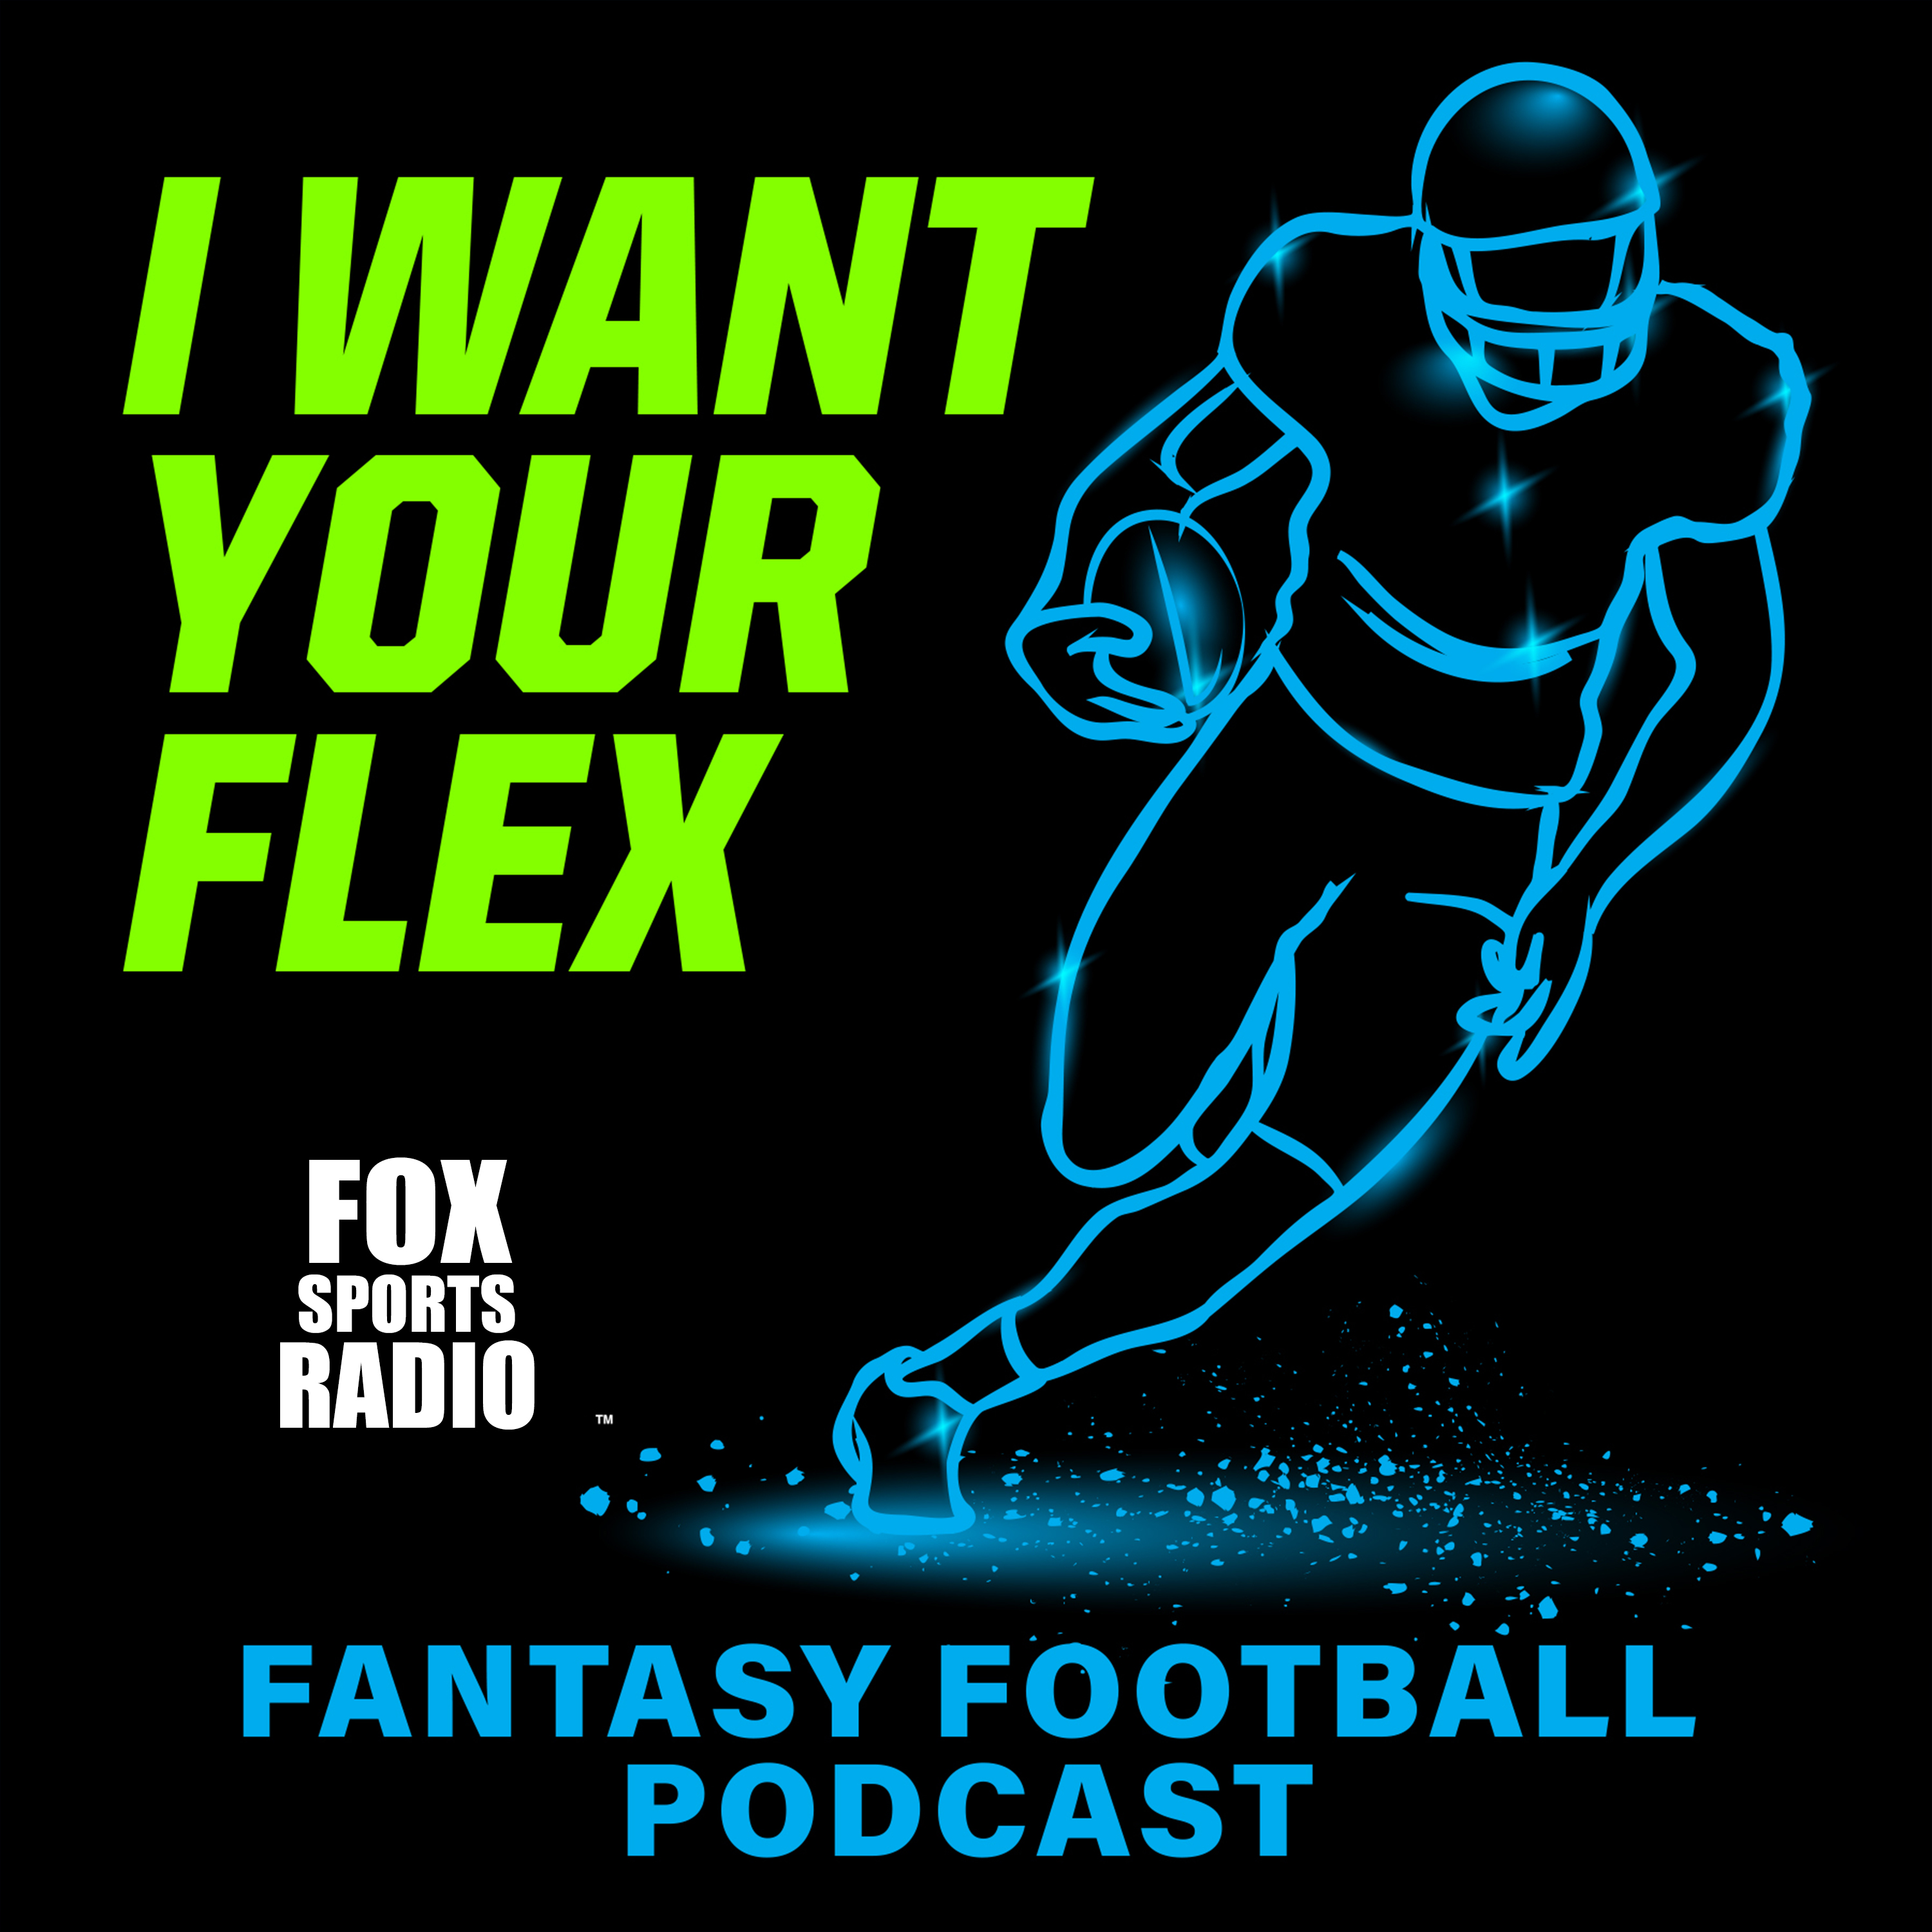 I WANT YOUR FLEX - Week 4 Rankings and Hot Plays